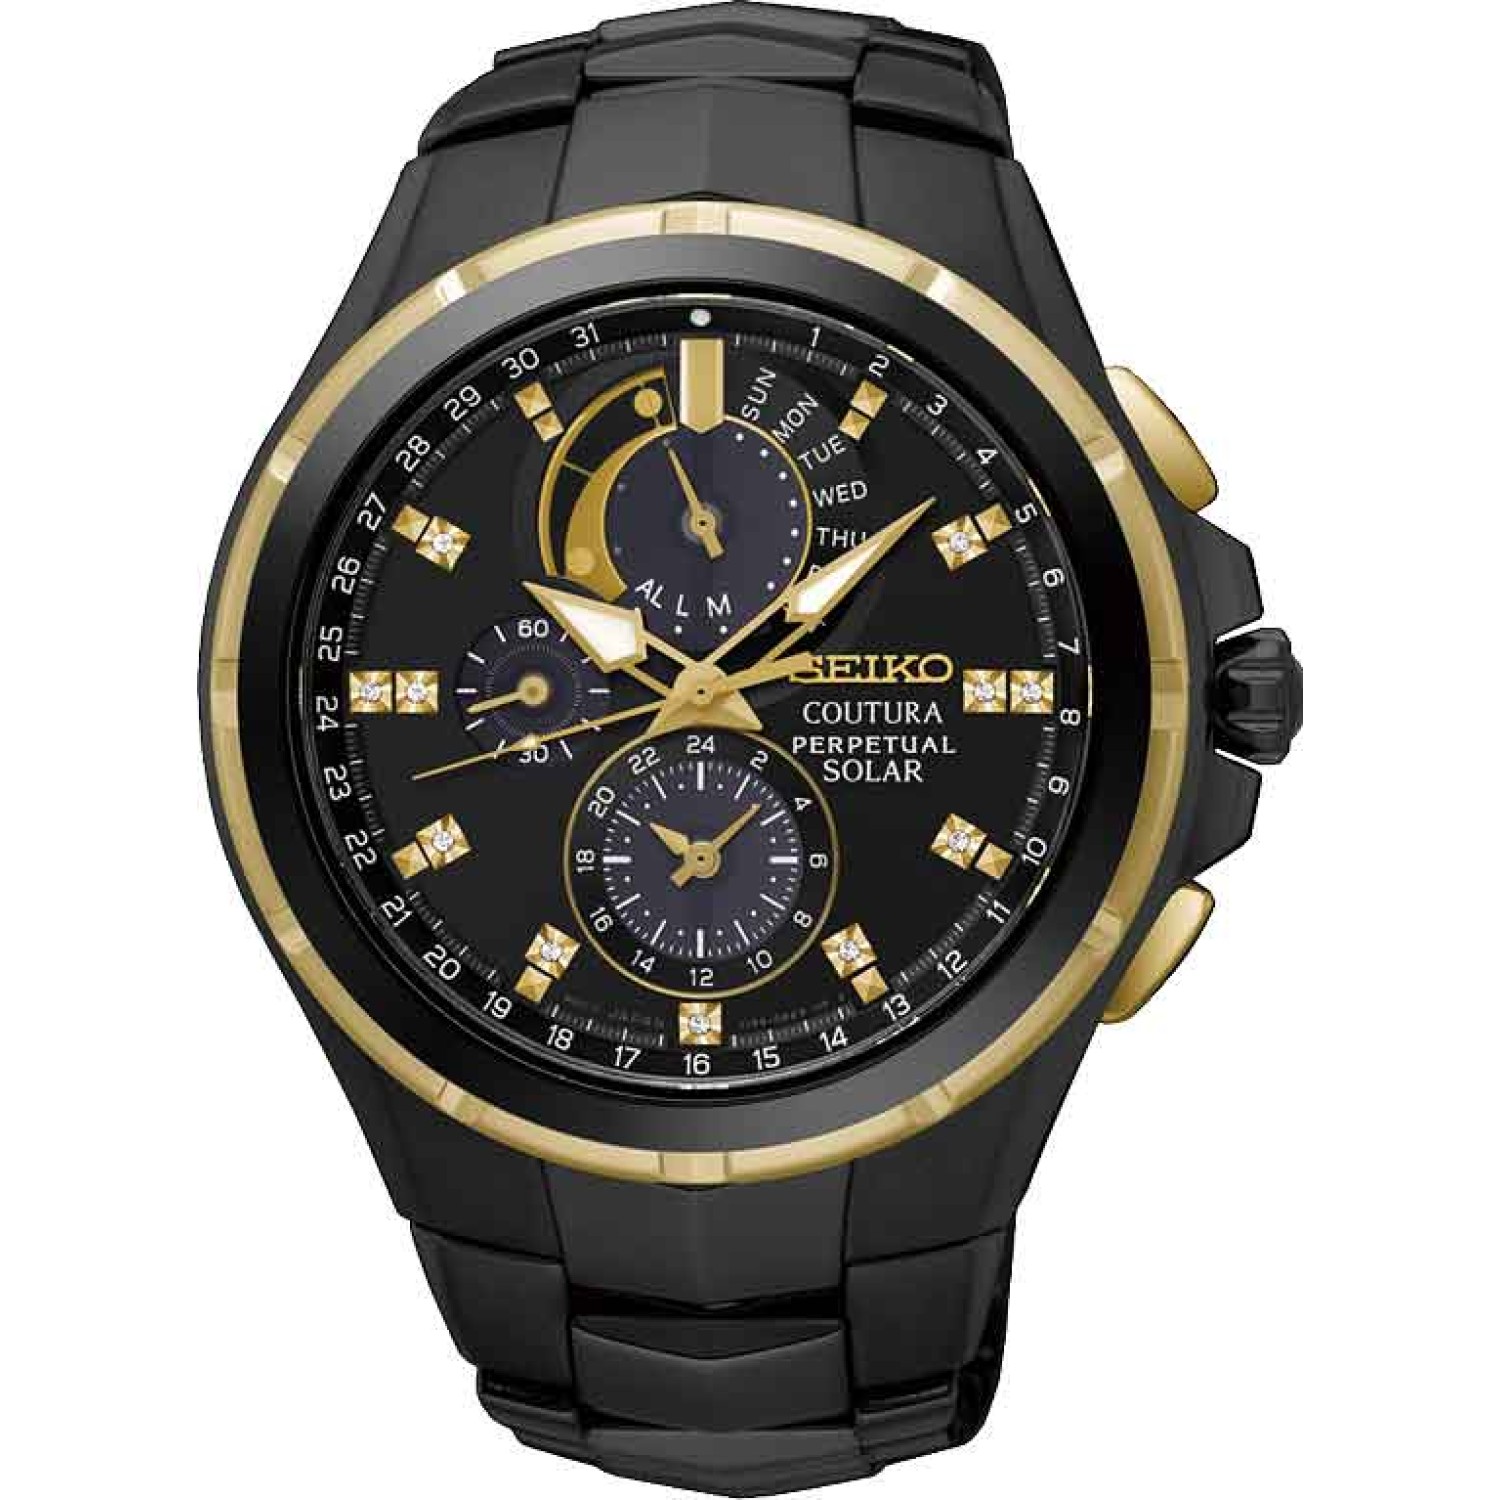 SSC573P Seiko Solar Perpetual Chronograph Diamond Watch. The Seiko SSC561P-9 features state-of-the-art perpetual calendar, chronograph timekeeping and stunning diamond hour markers, this mens Seiko Coutura watch defines timeless style. 3 Months No Payment